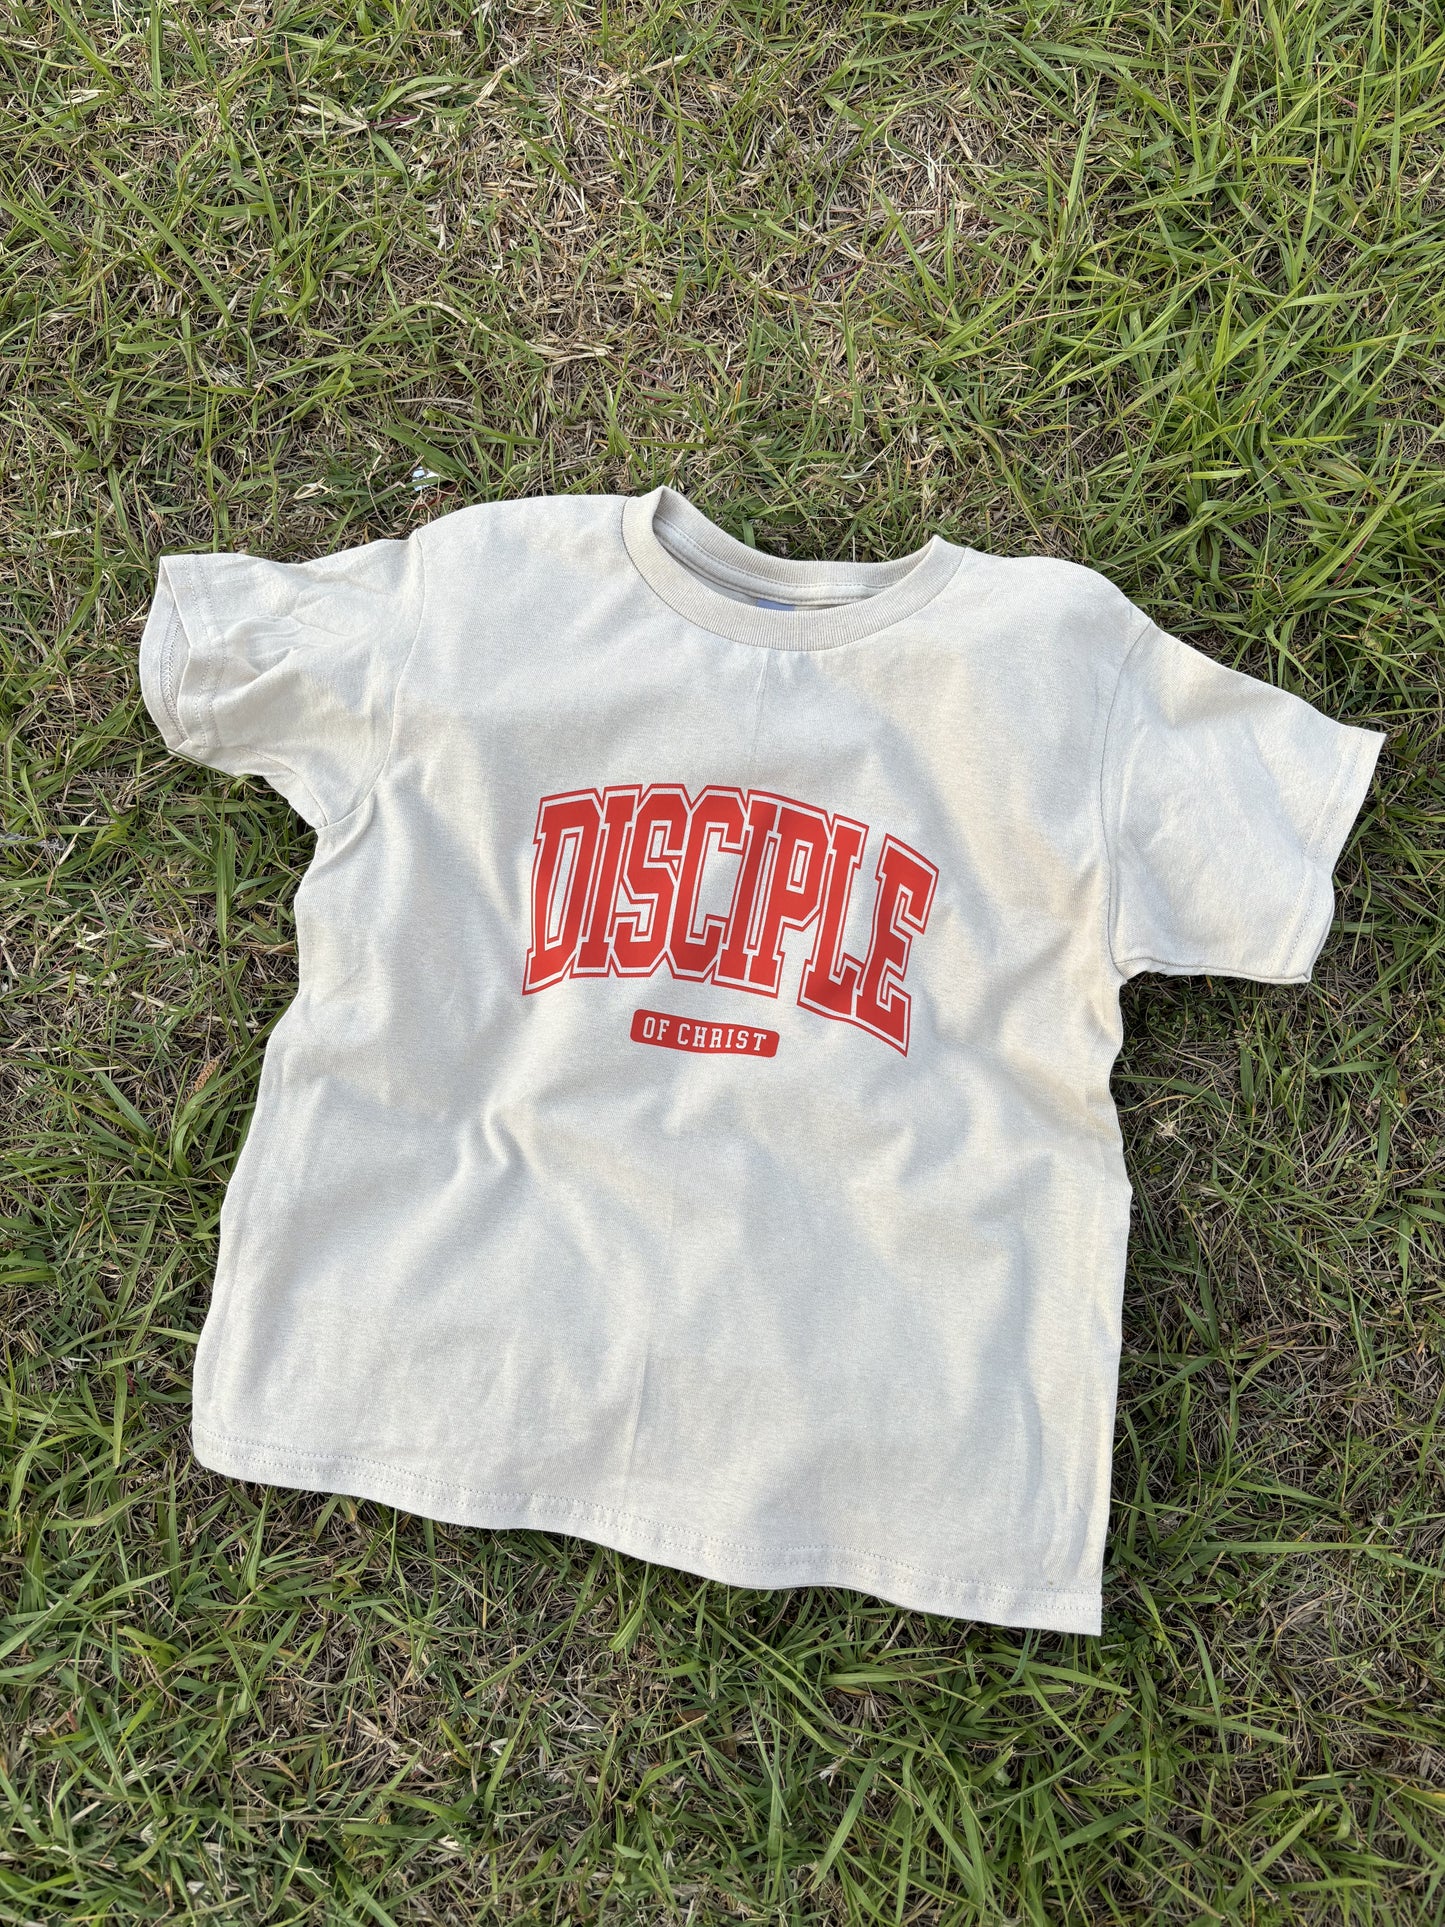 Disciple Of Christ - Youth T Shirt